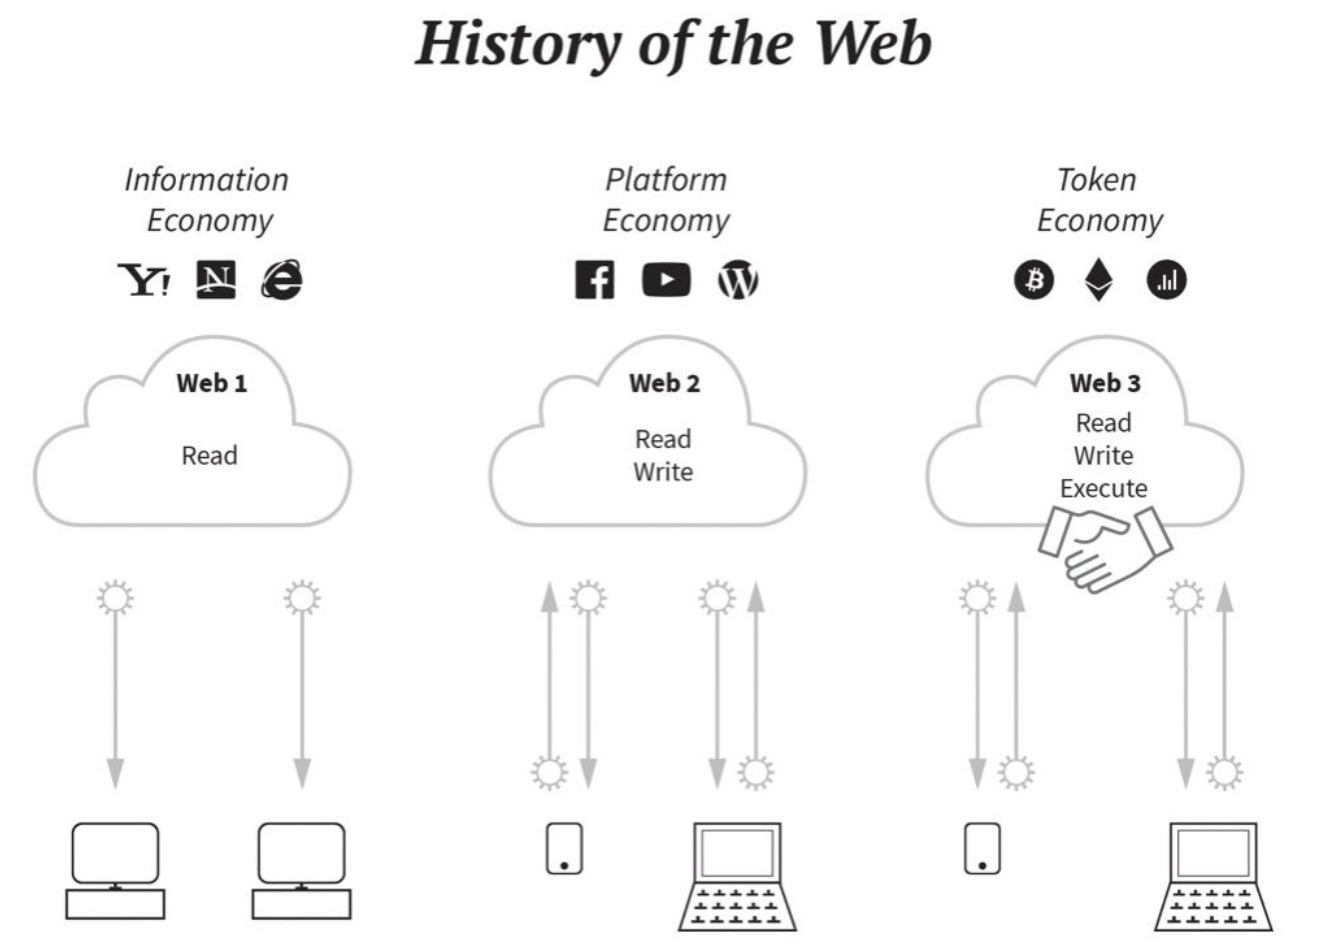 History of the web graph.